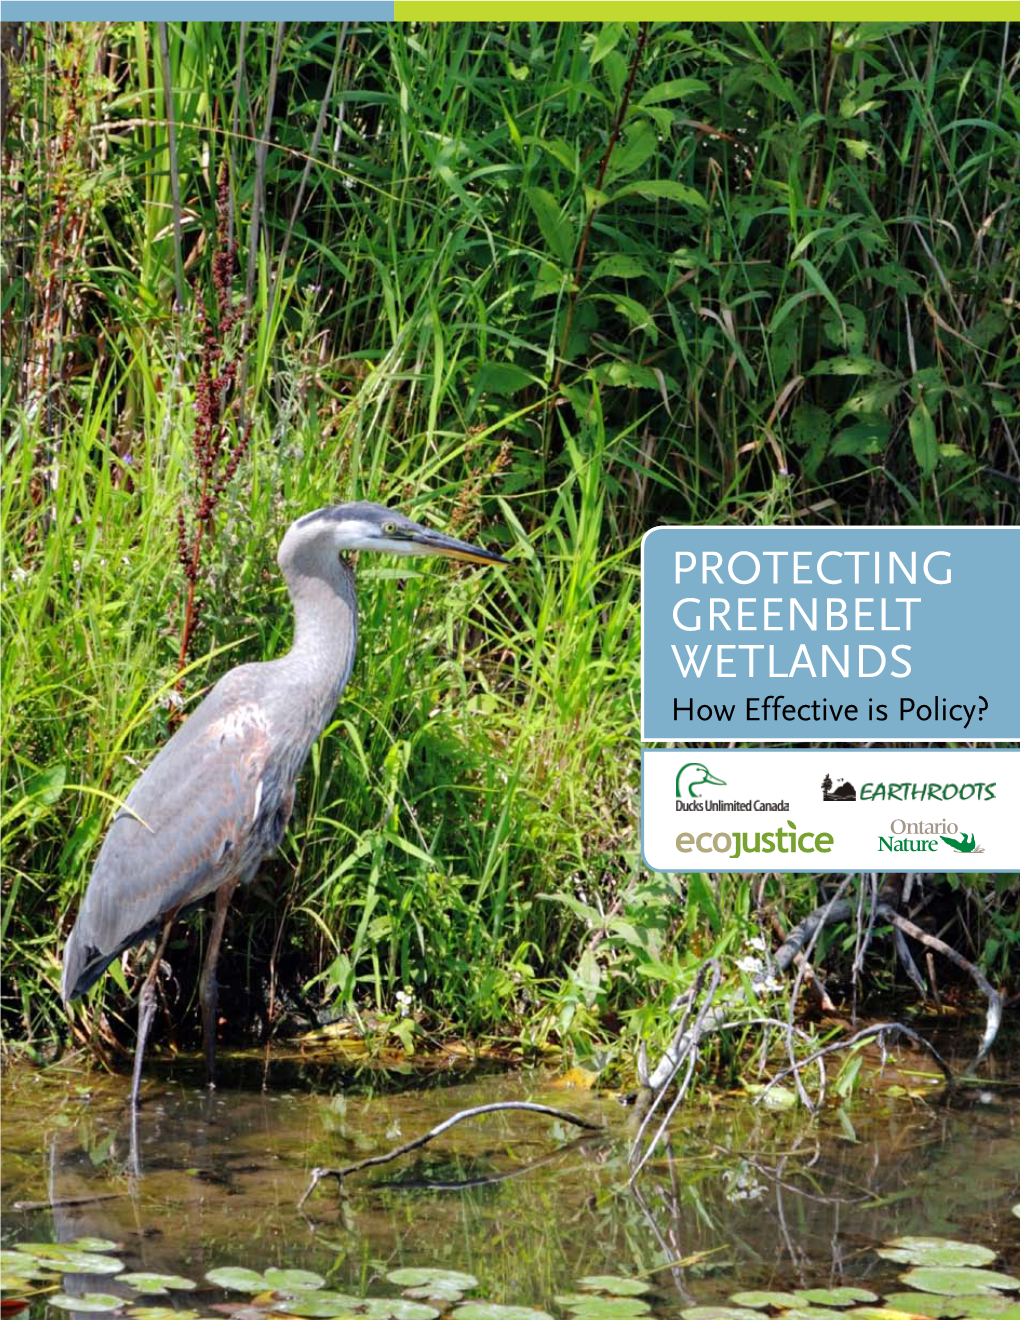 Protecting Greenbelt Wetlands How Effective Is Policy? Protecting Greenbelt Wetlands: How Effective Is Policy?